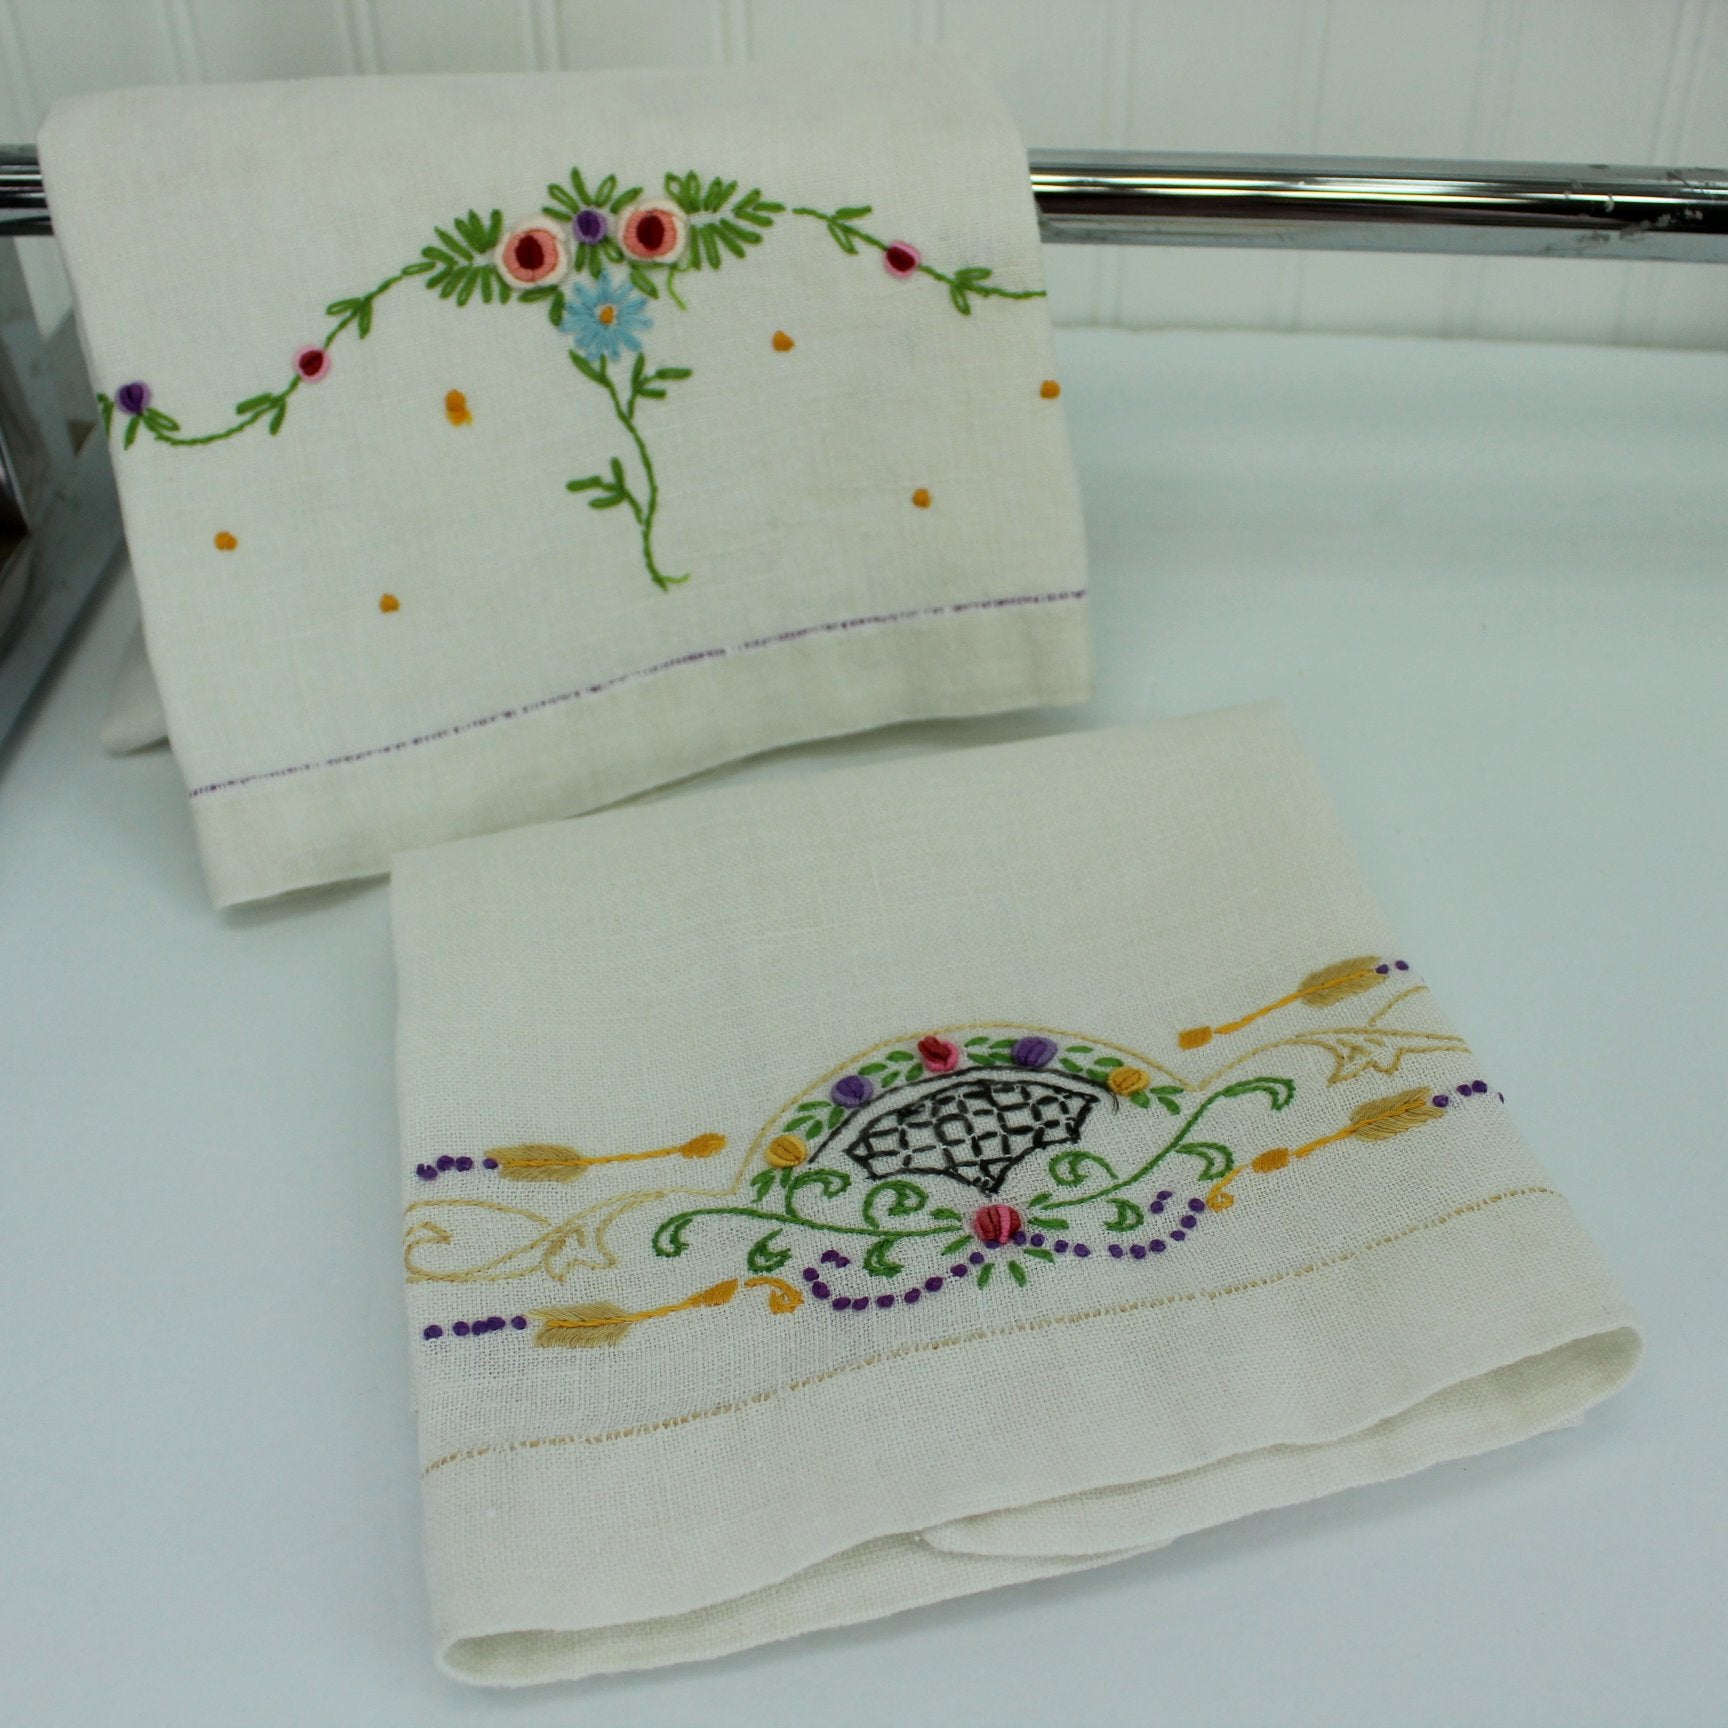 Pair Vintage Linen Hand Towels Exquisite Dimensional Embroidery 1940s similar towels hand made